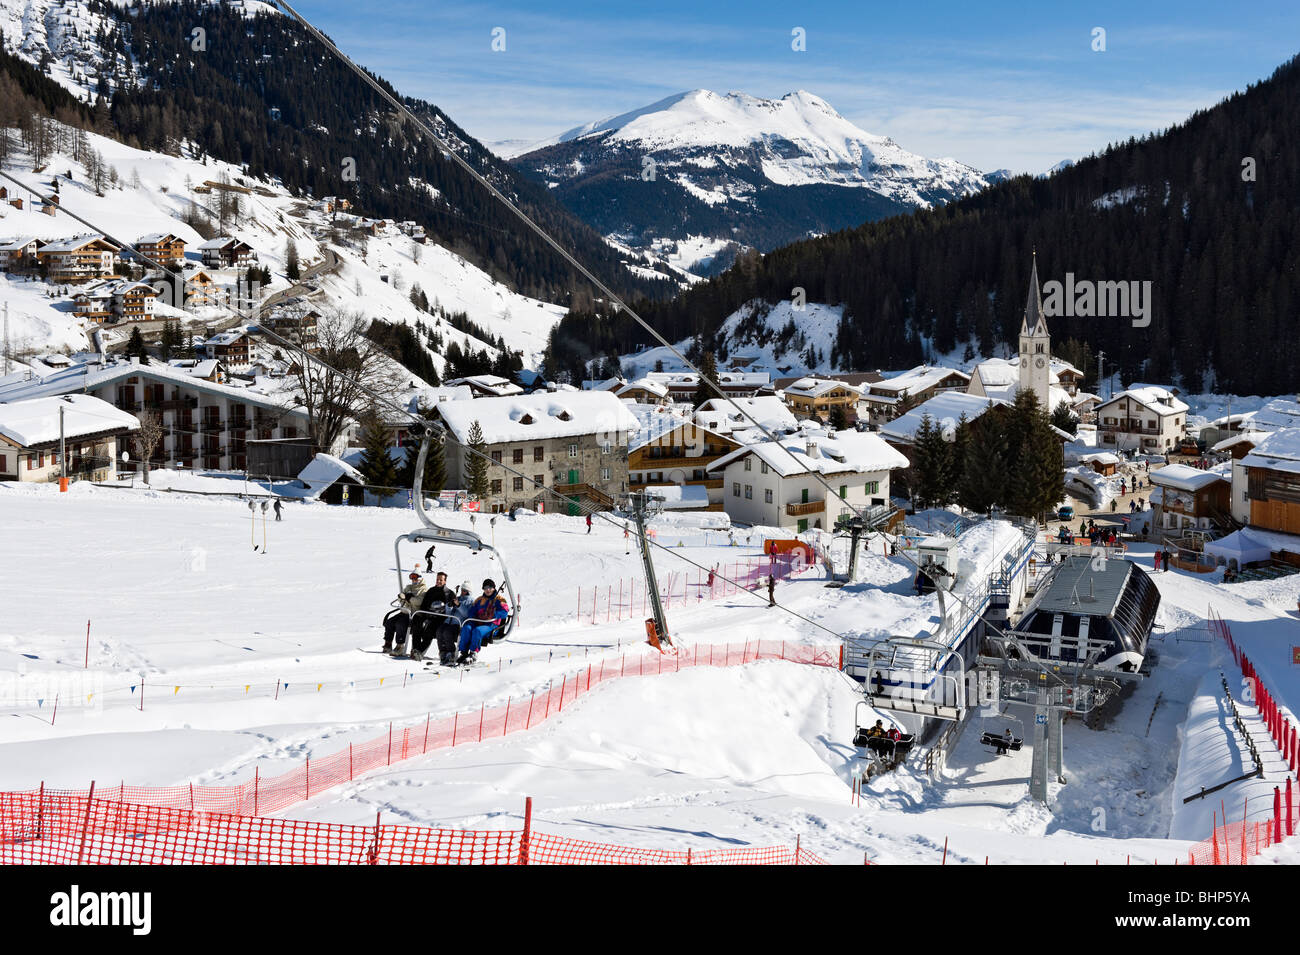 View over the resort of Arabba from the slopes, Sella Ronda Ski ...